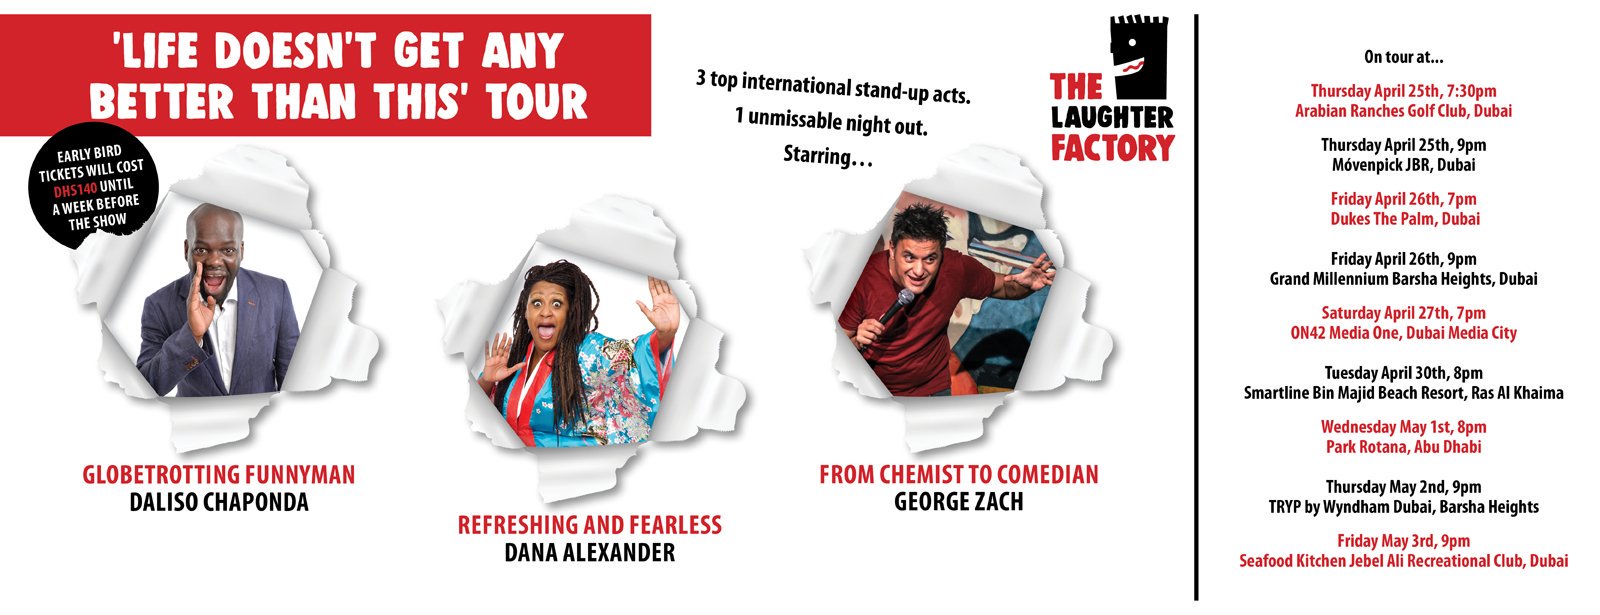 The Laughter Factory – Life doesn’t get any better than this - Coming Soon in UAE